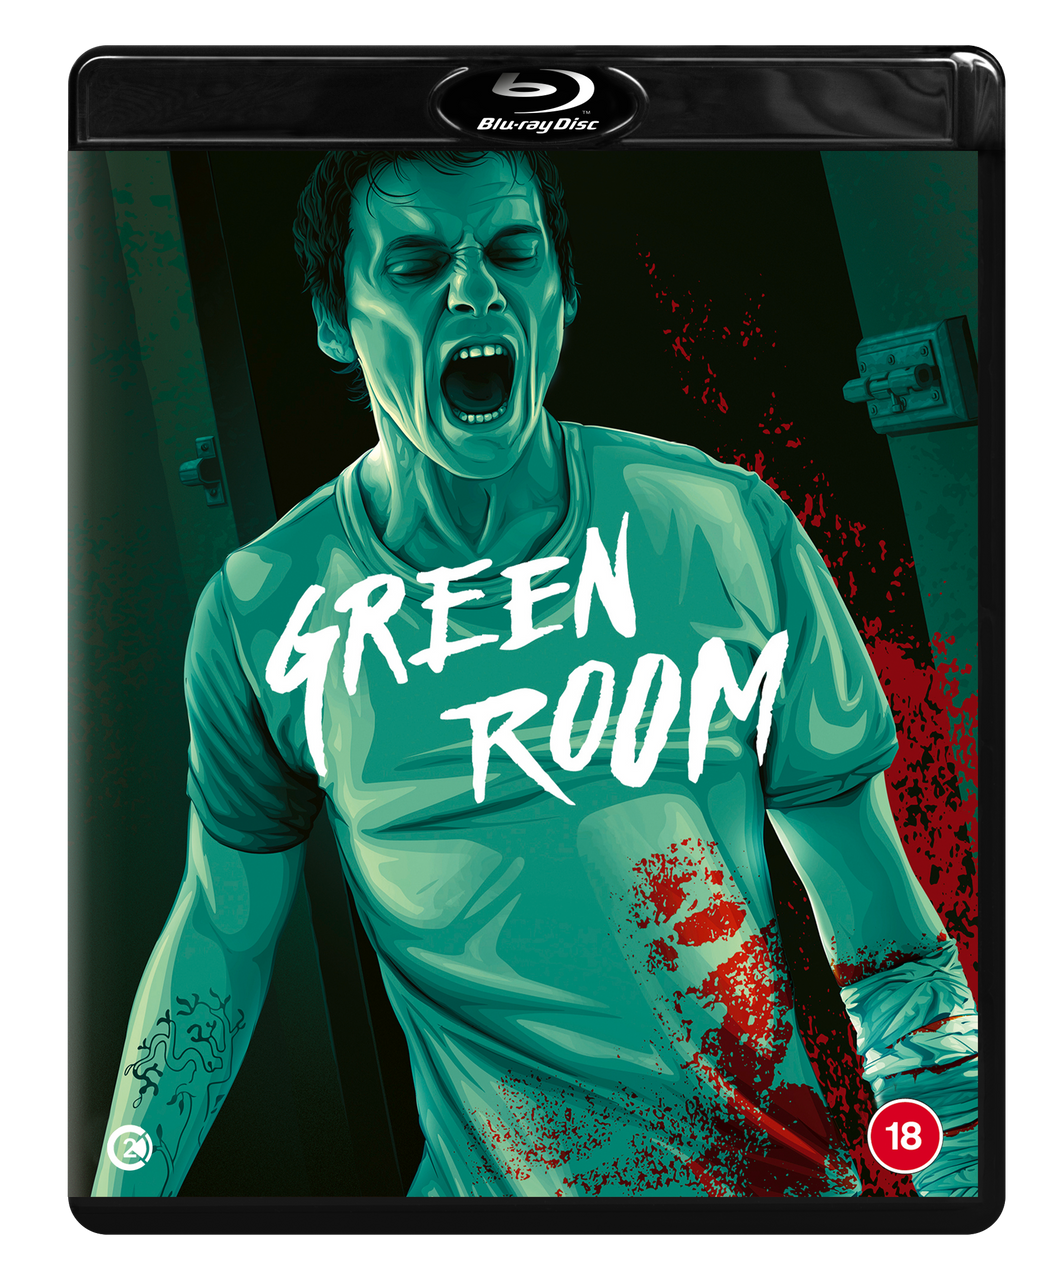 Green Room Blu-ray: Pre-Order Available March 18th